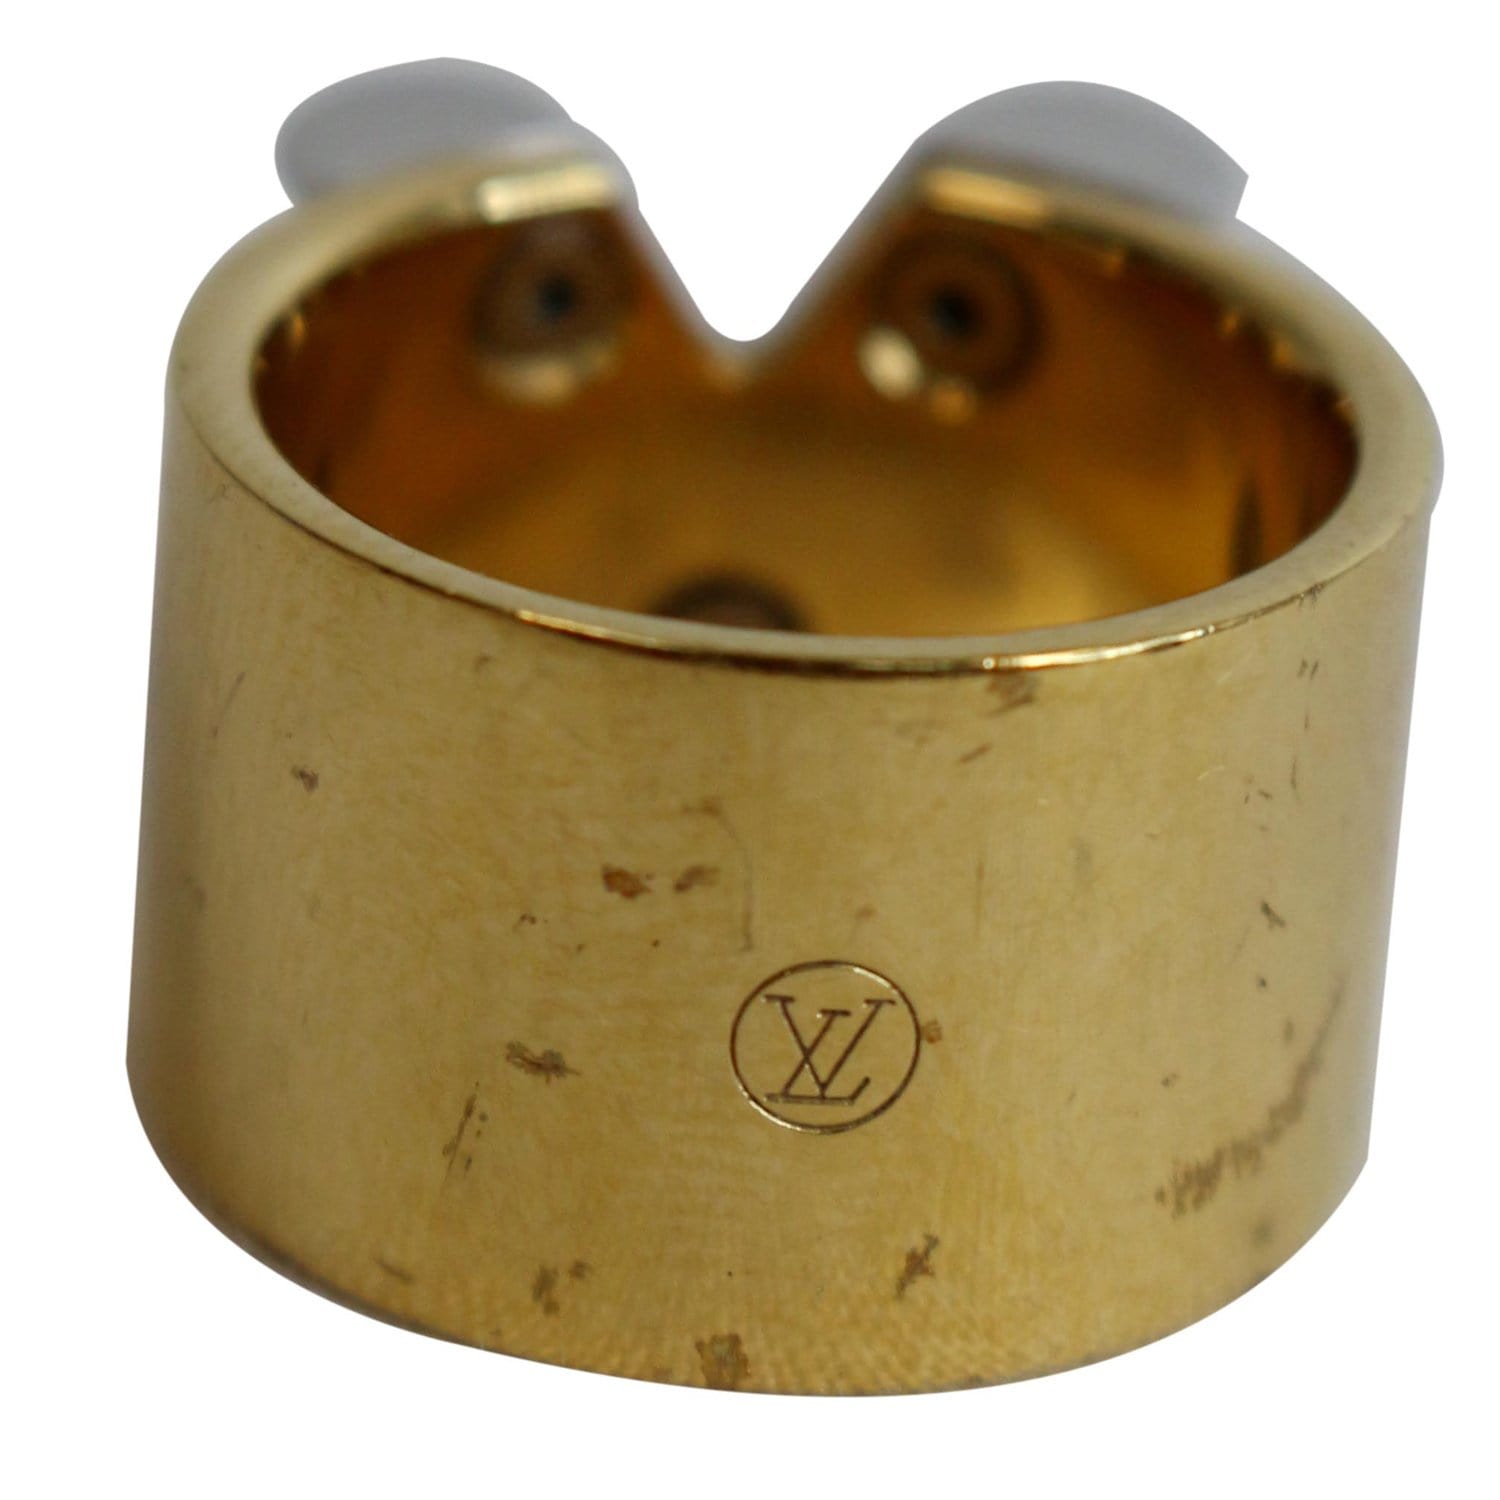 Authentic Louis Vuitton Gold D Ring 5/8” With Leather For Bag